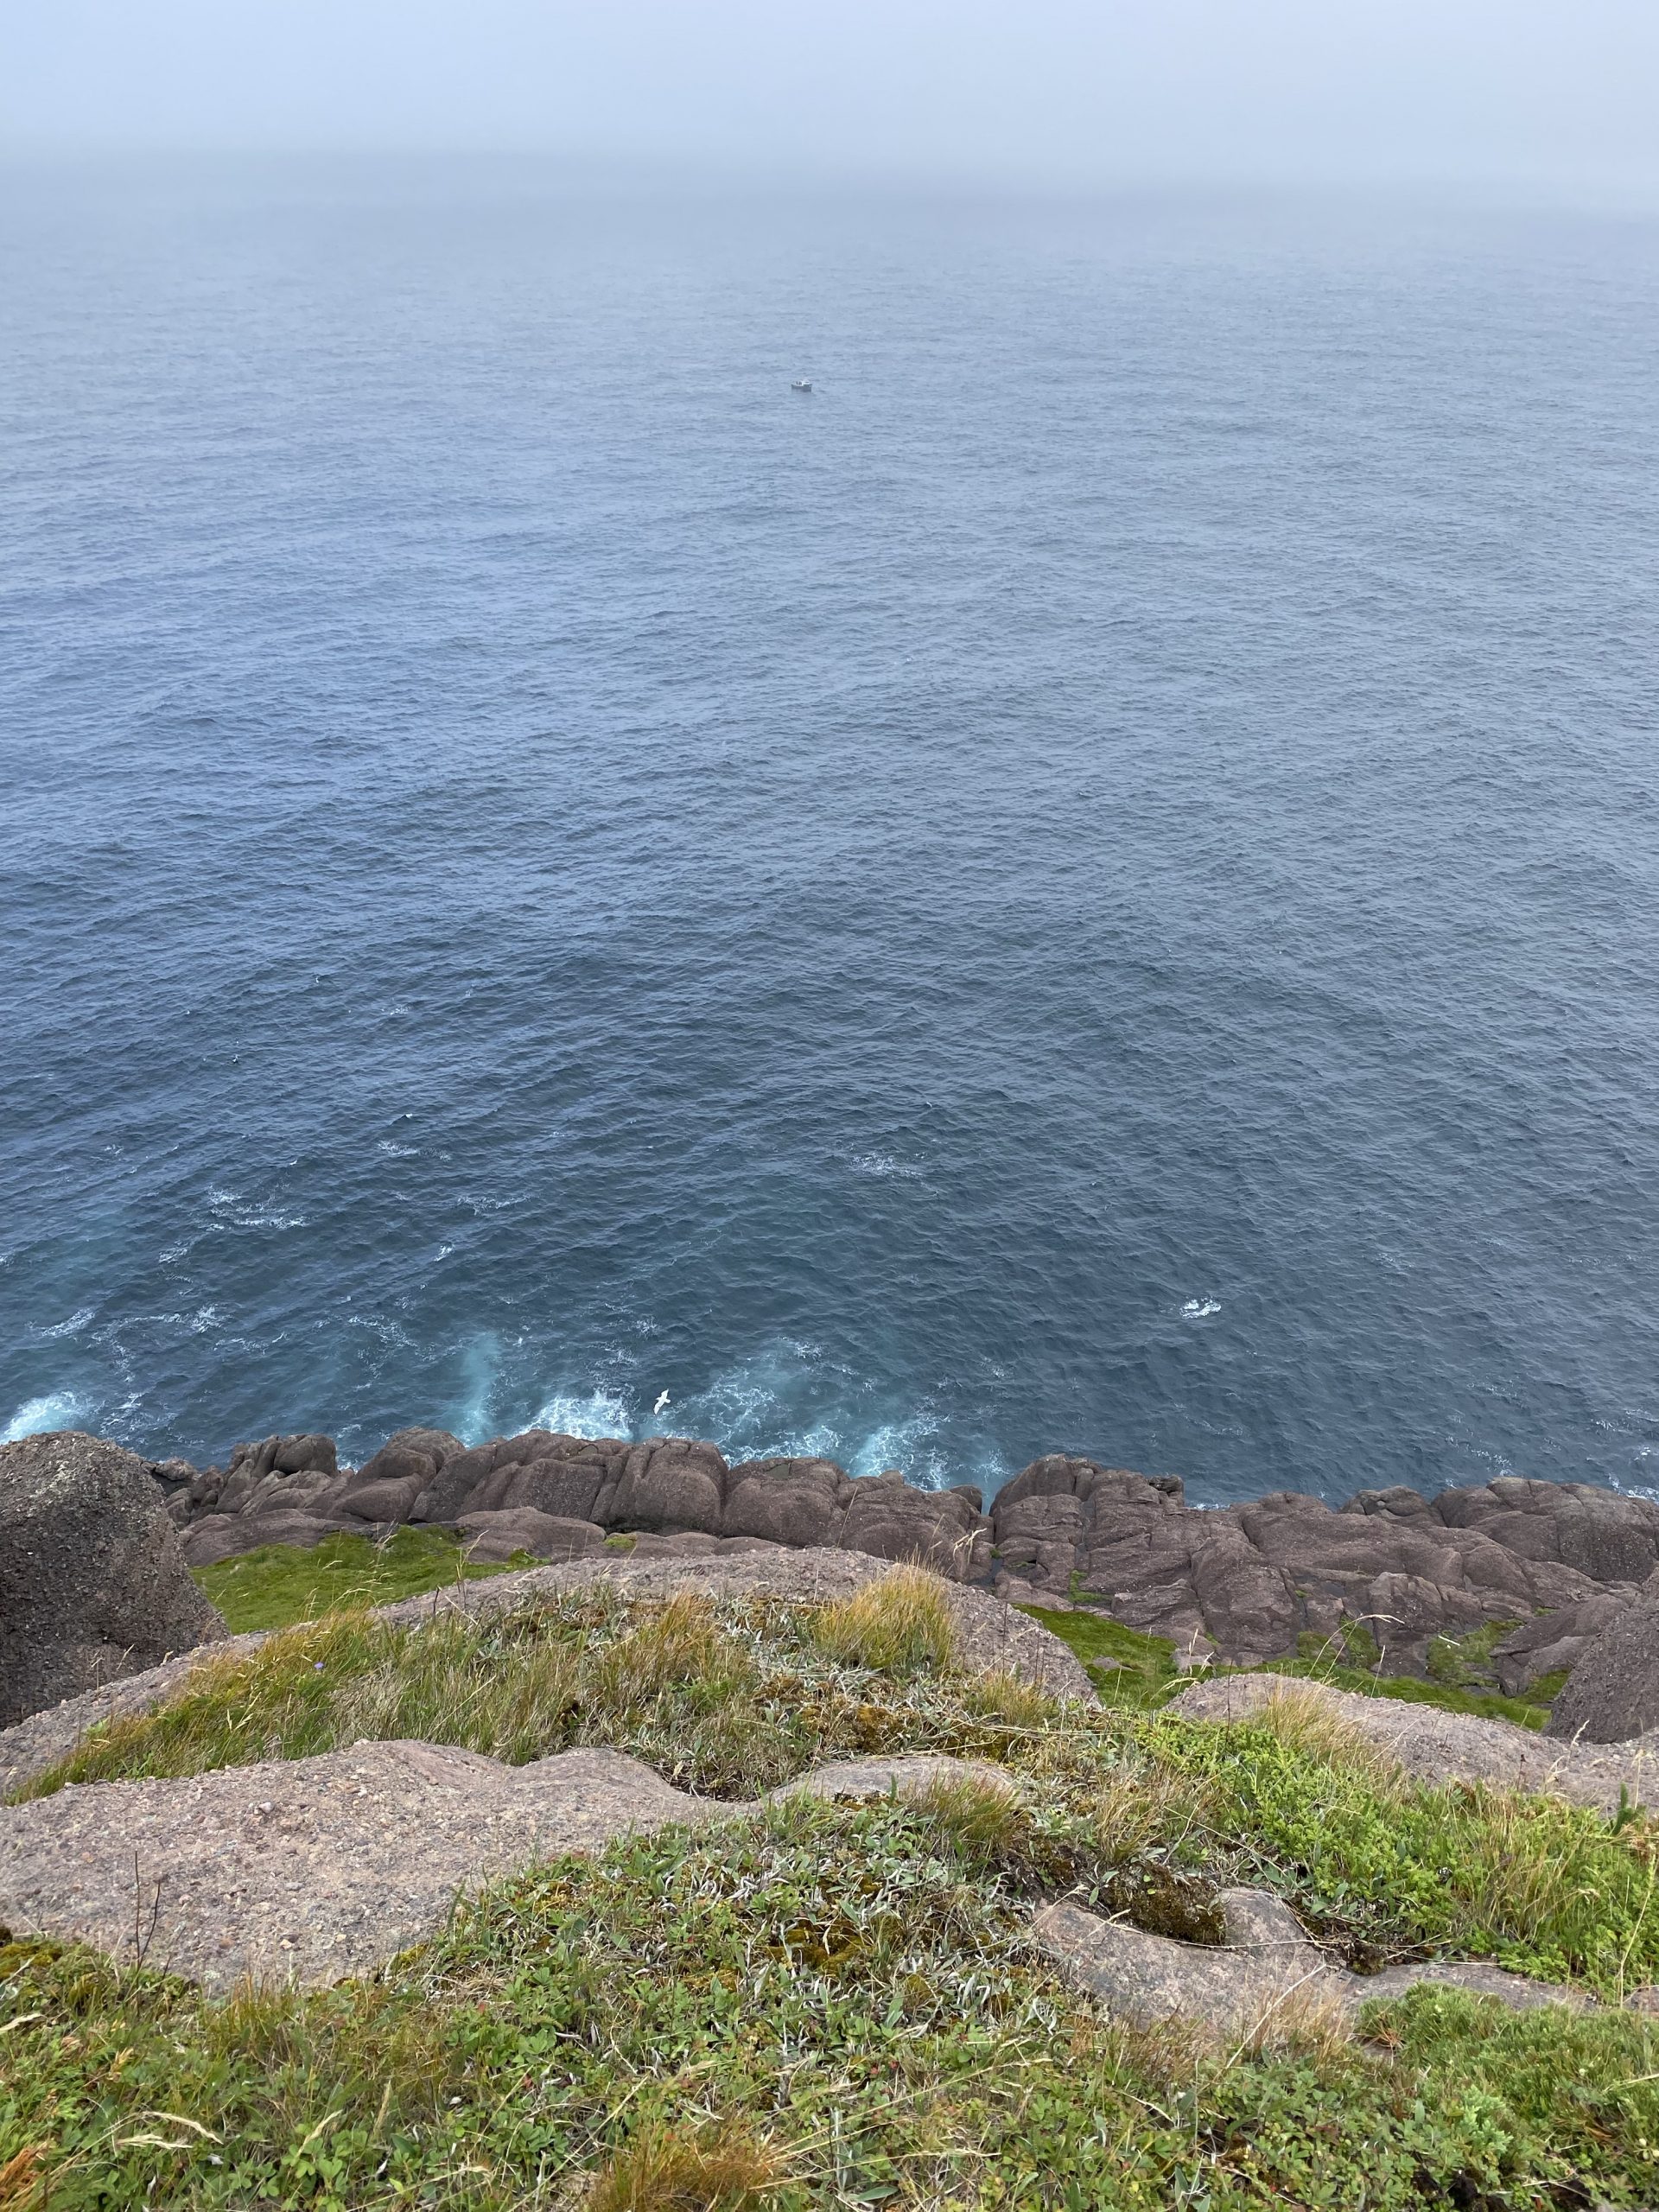 Looking down a cliff to the ocean at Cape Spear; little fishing boat out in the distance.